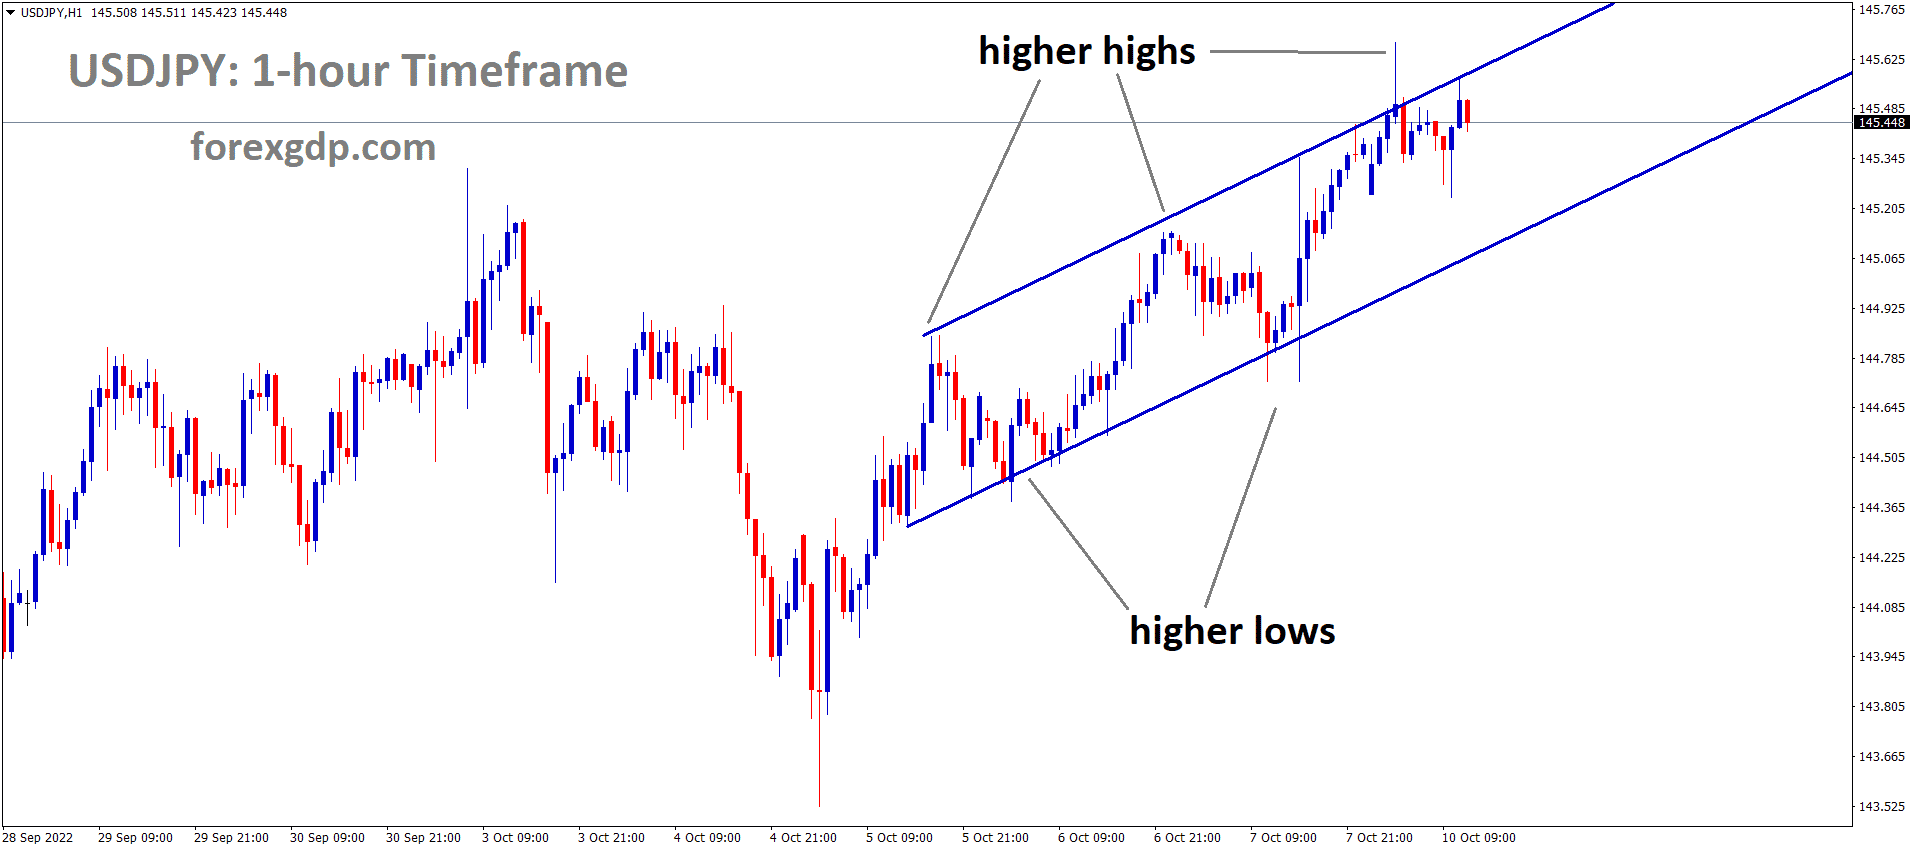 USDJPY is moving in an Ascending channel and the market has reached the higher high area of the channel